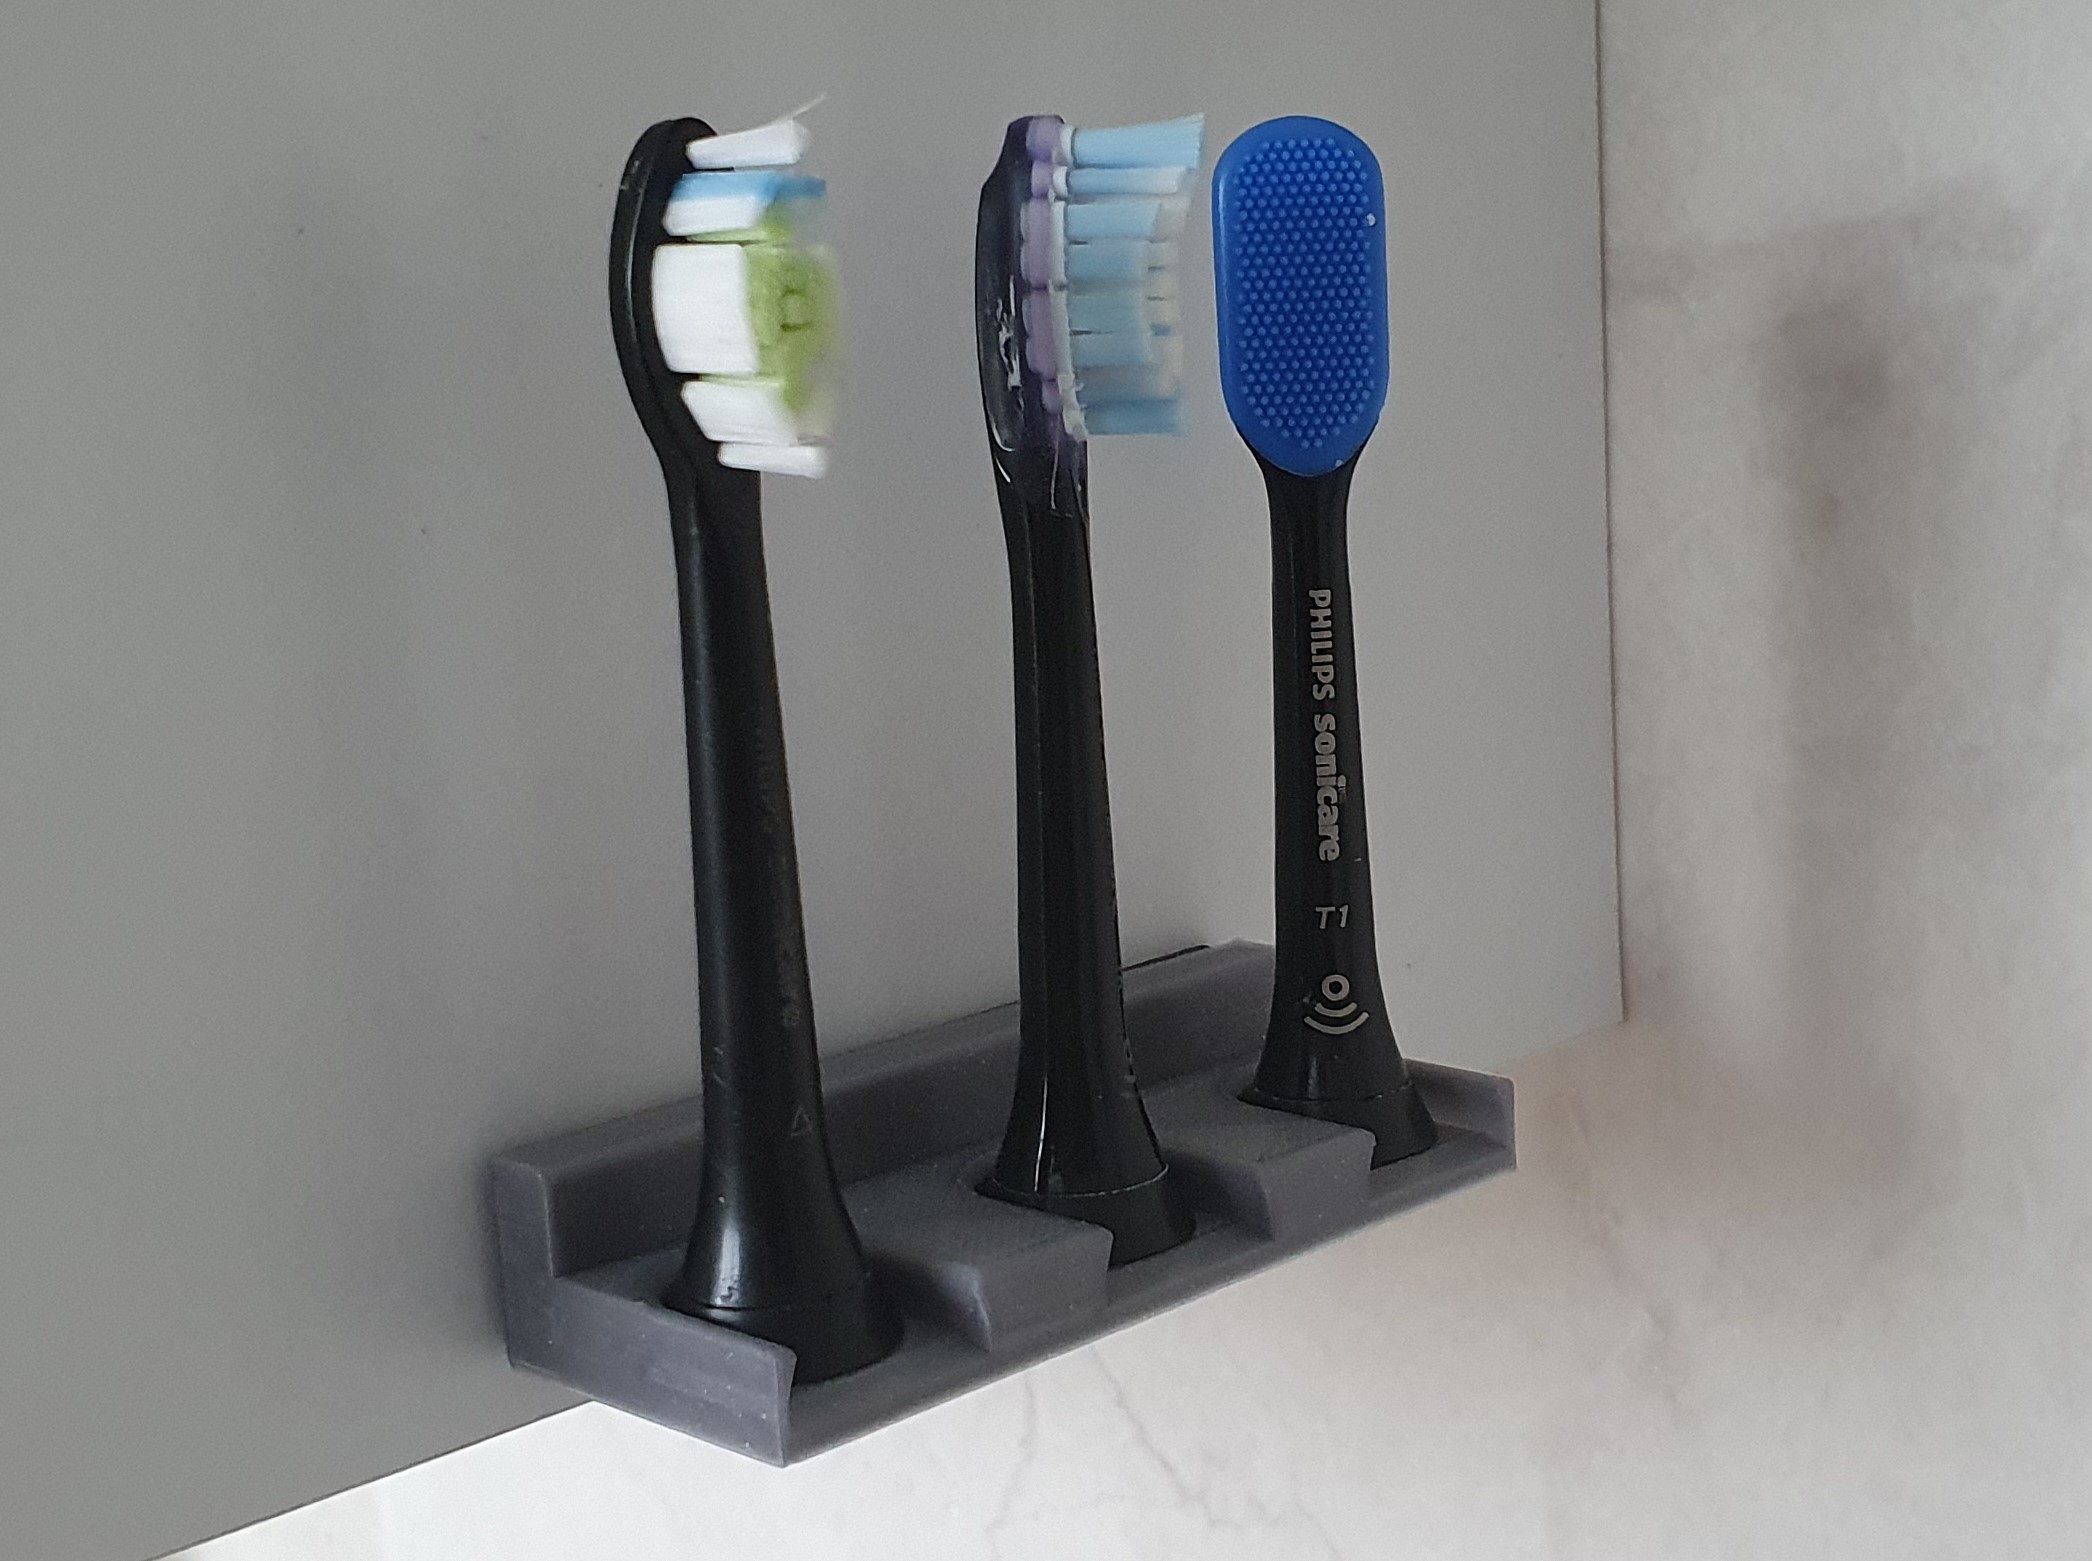 Sonicare toothbrush heads stand - head up